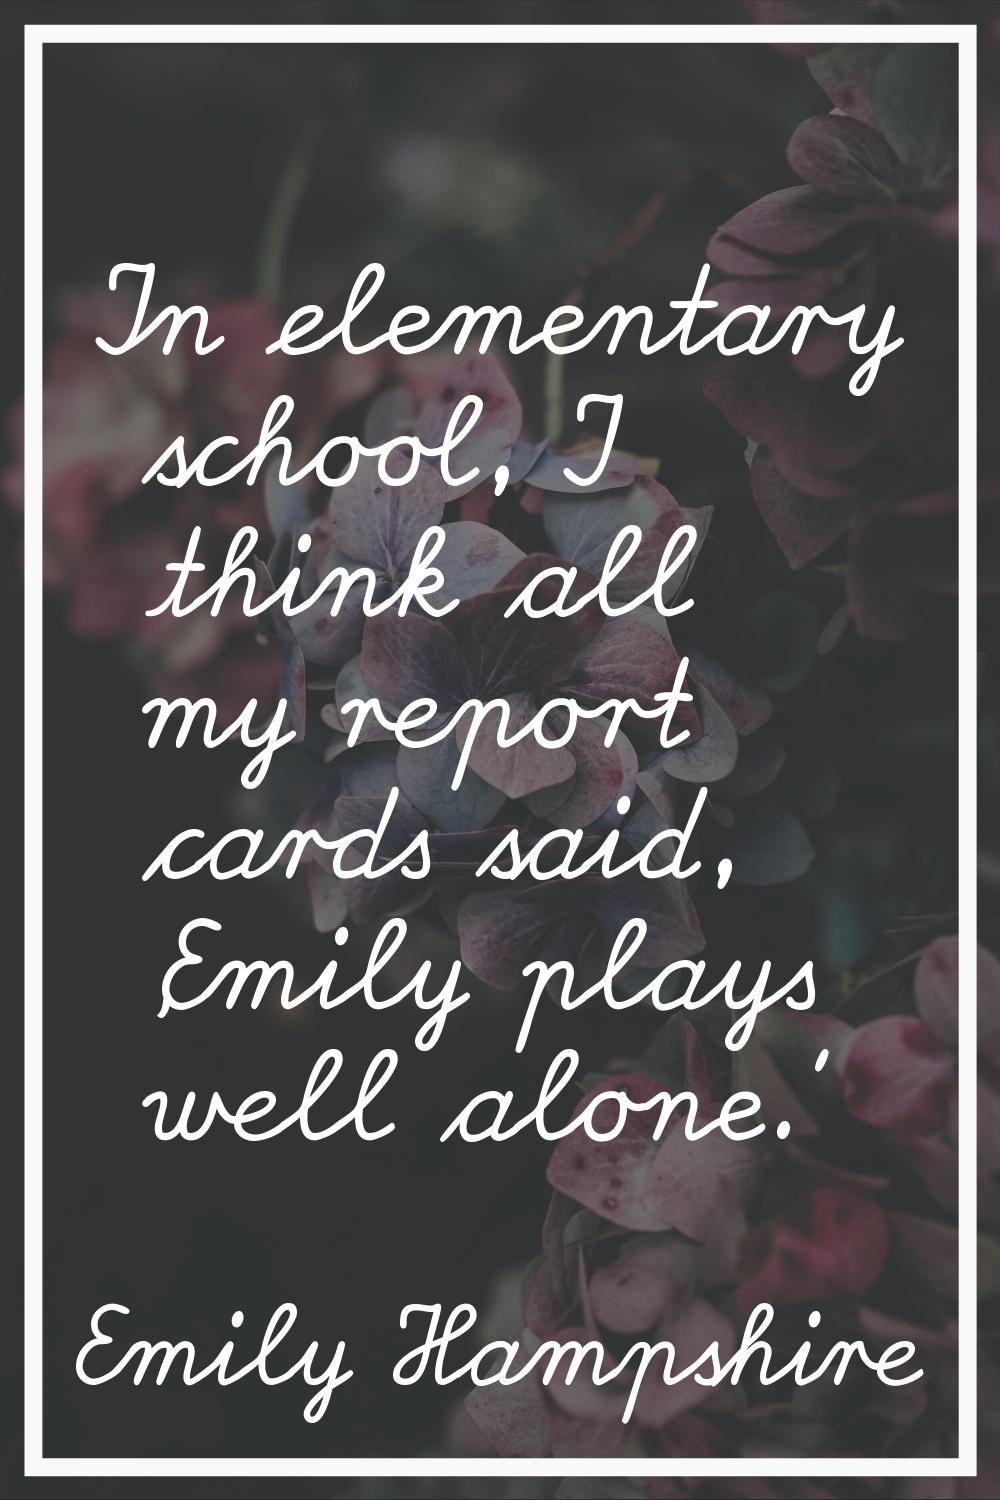 In elementary school, I think all my report cards said, 'Emily plays well alone.'